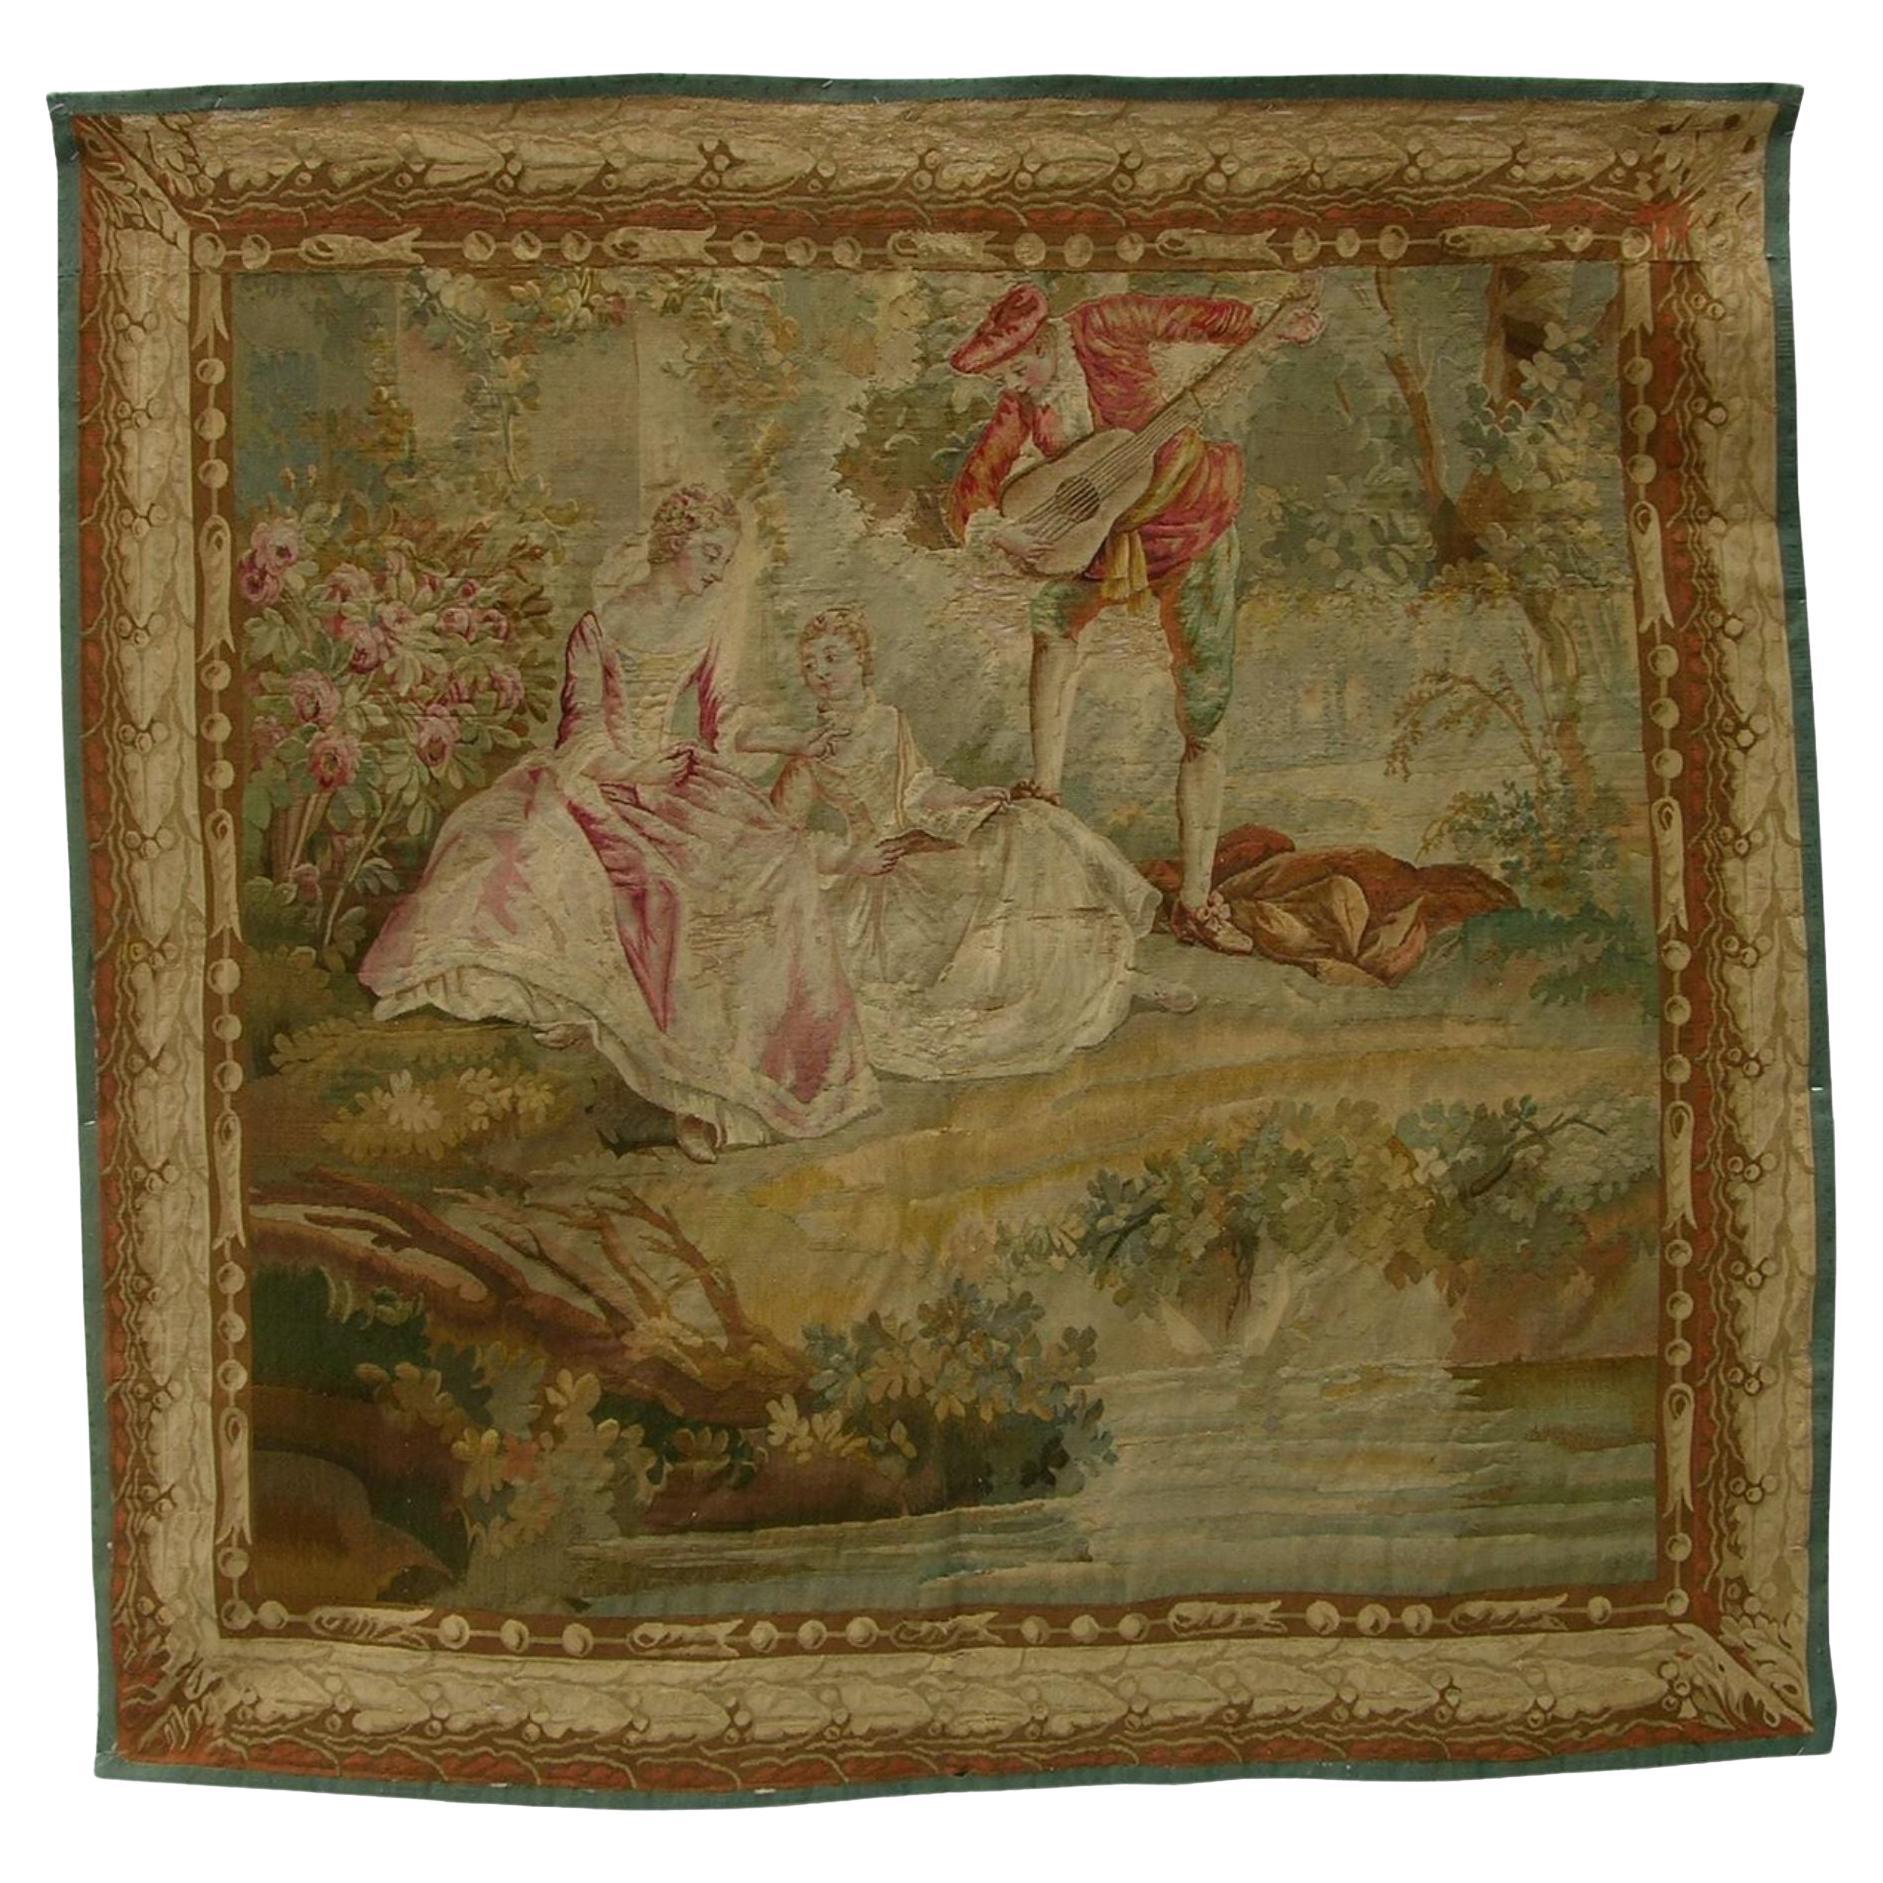 1900 Antique French Tapestry 5'4" X 5'2" For Sale